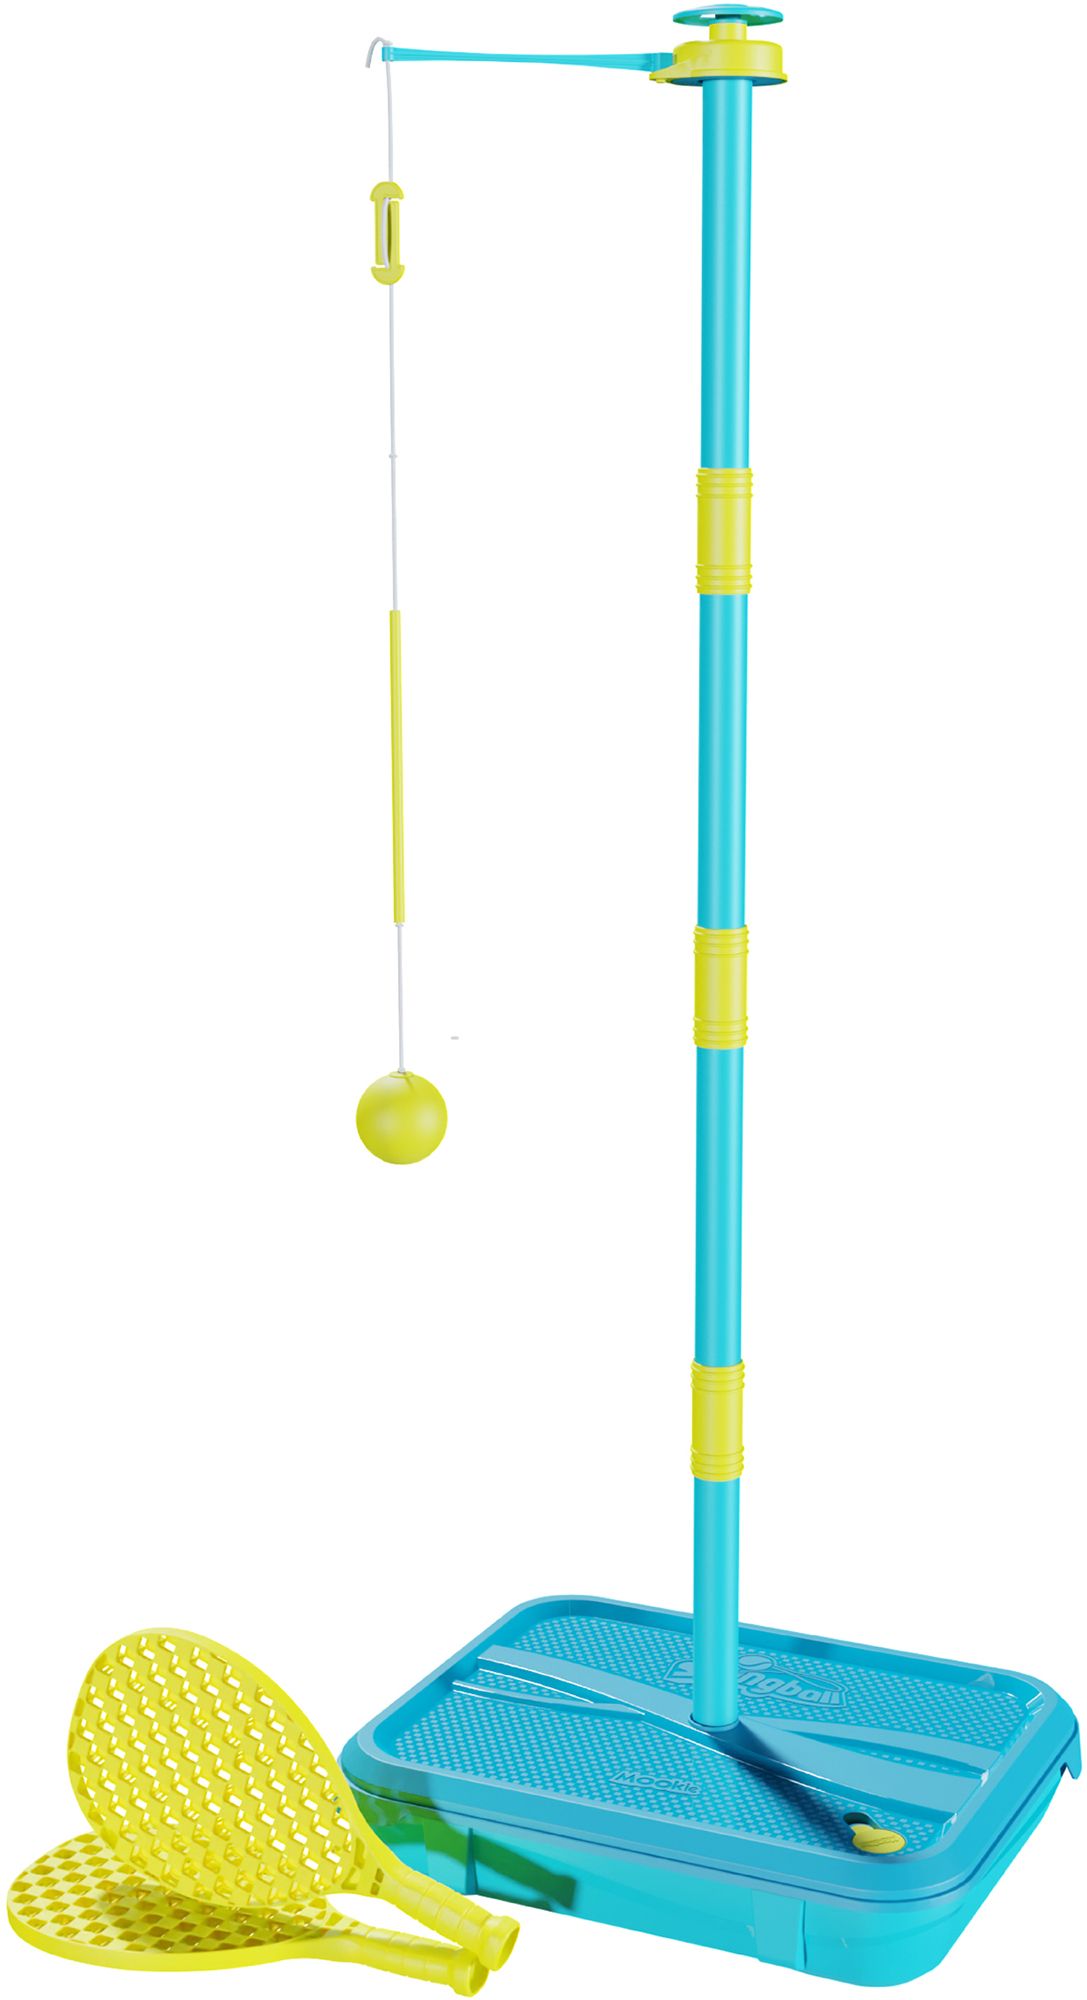 National Sporting Goods Swingball Early Tether Tennis